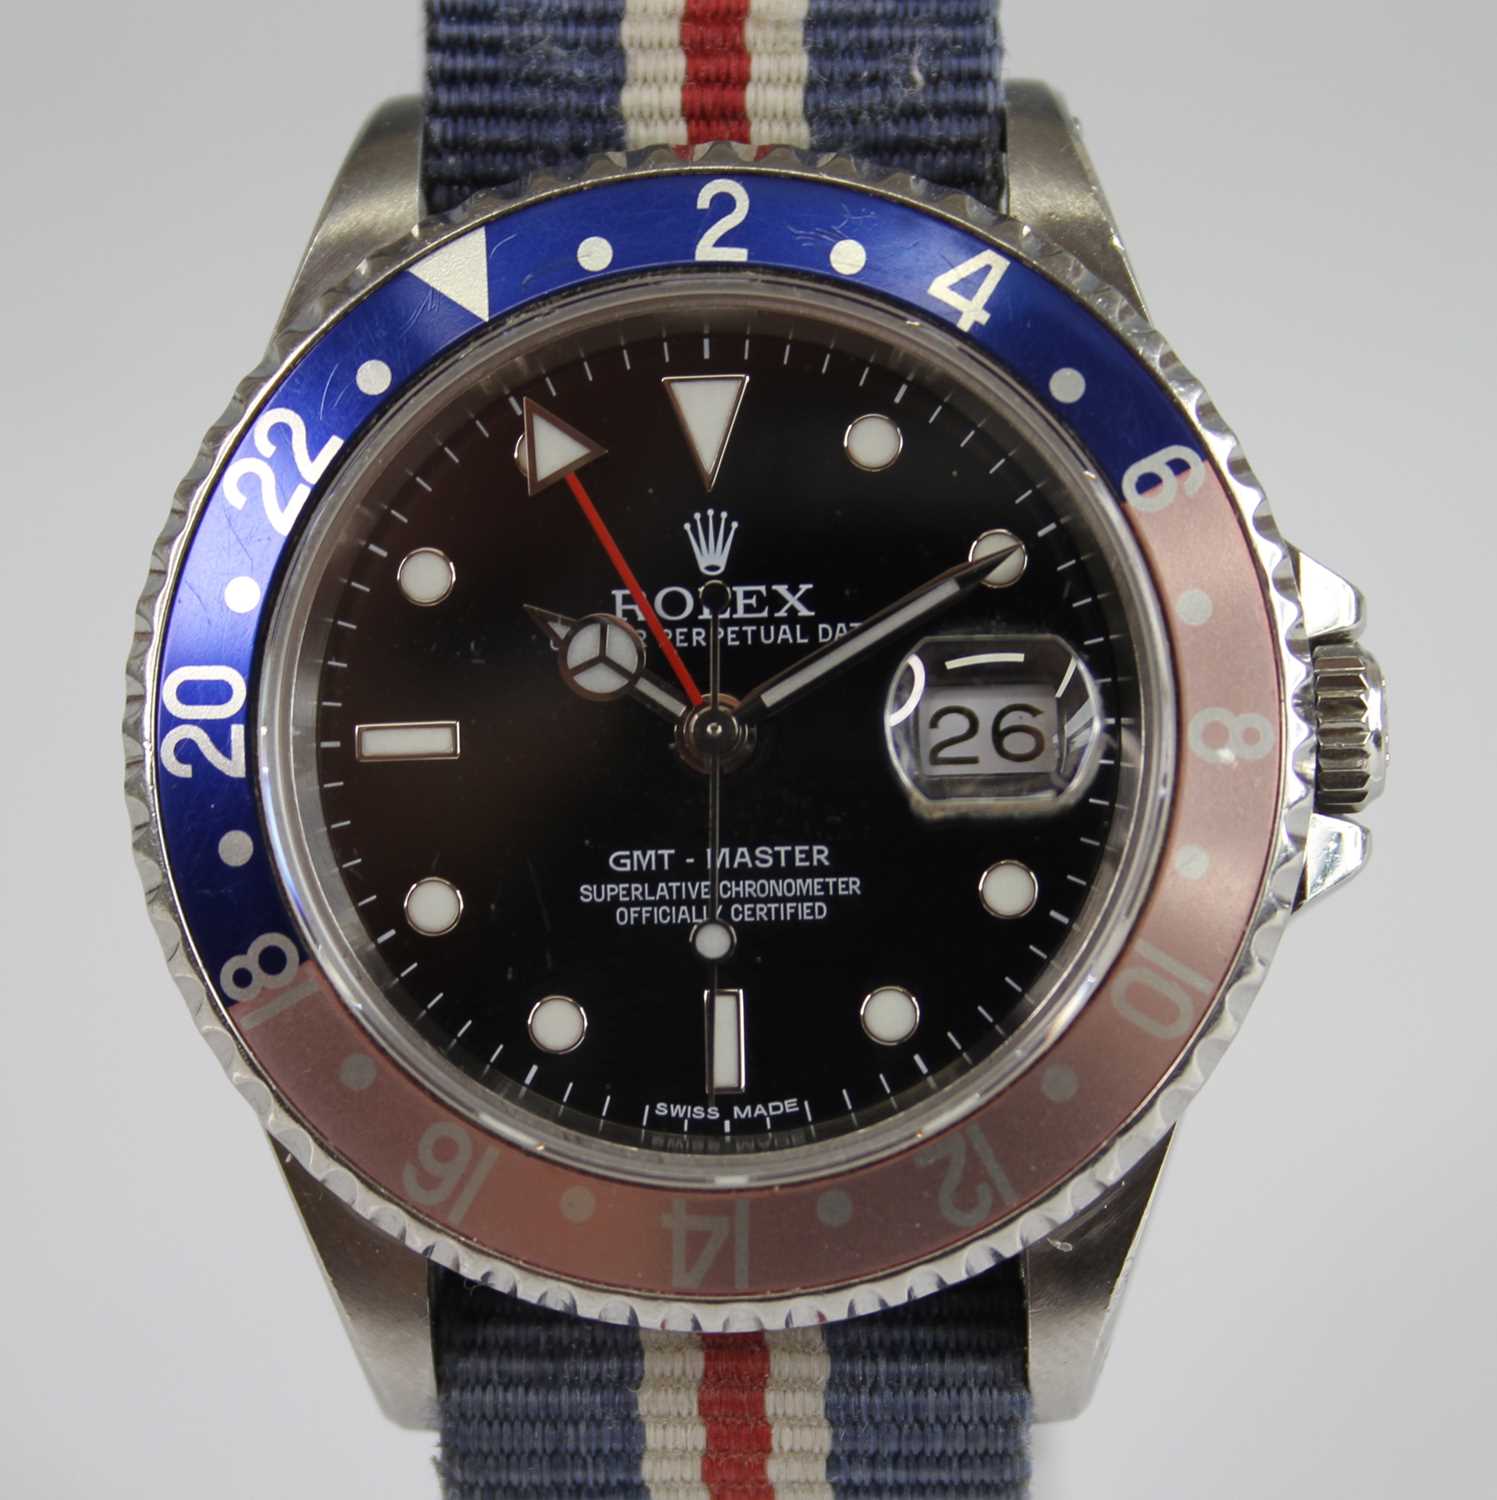 A gent's Rolex Oyster Perpetual Date GMT-Master Superlative Chronometer officially certified, with